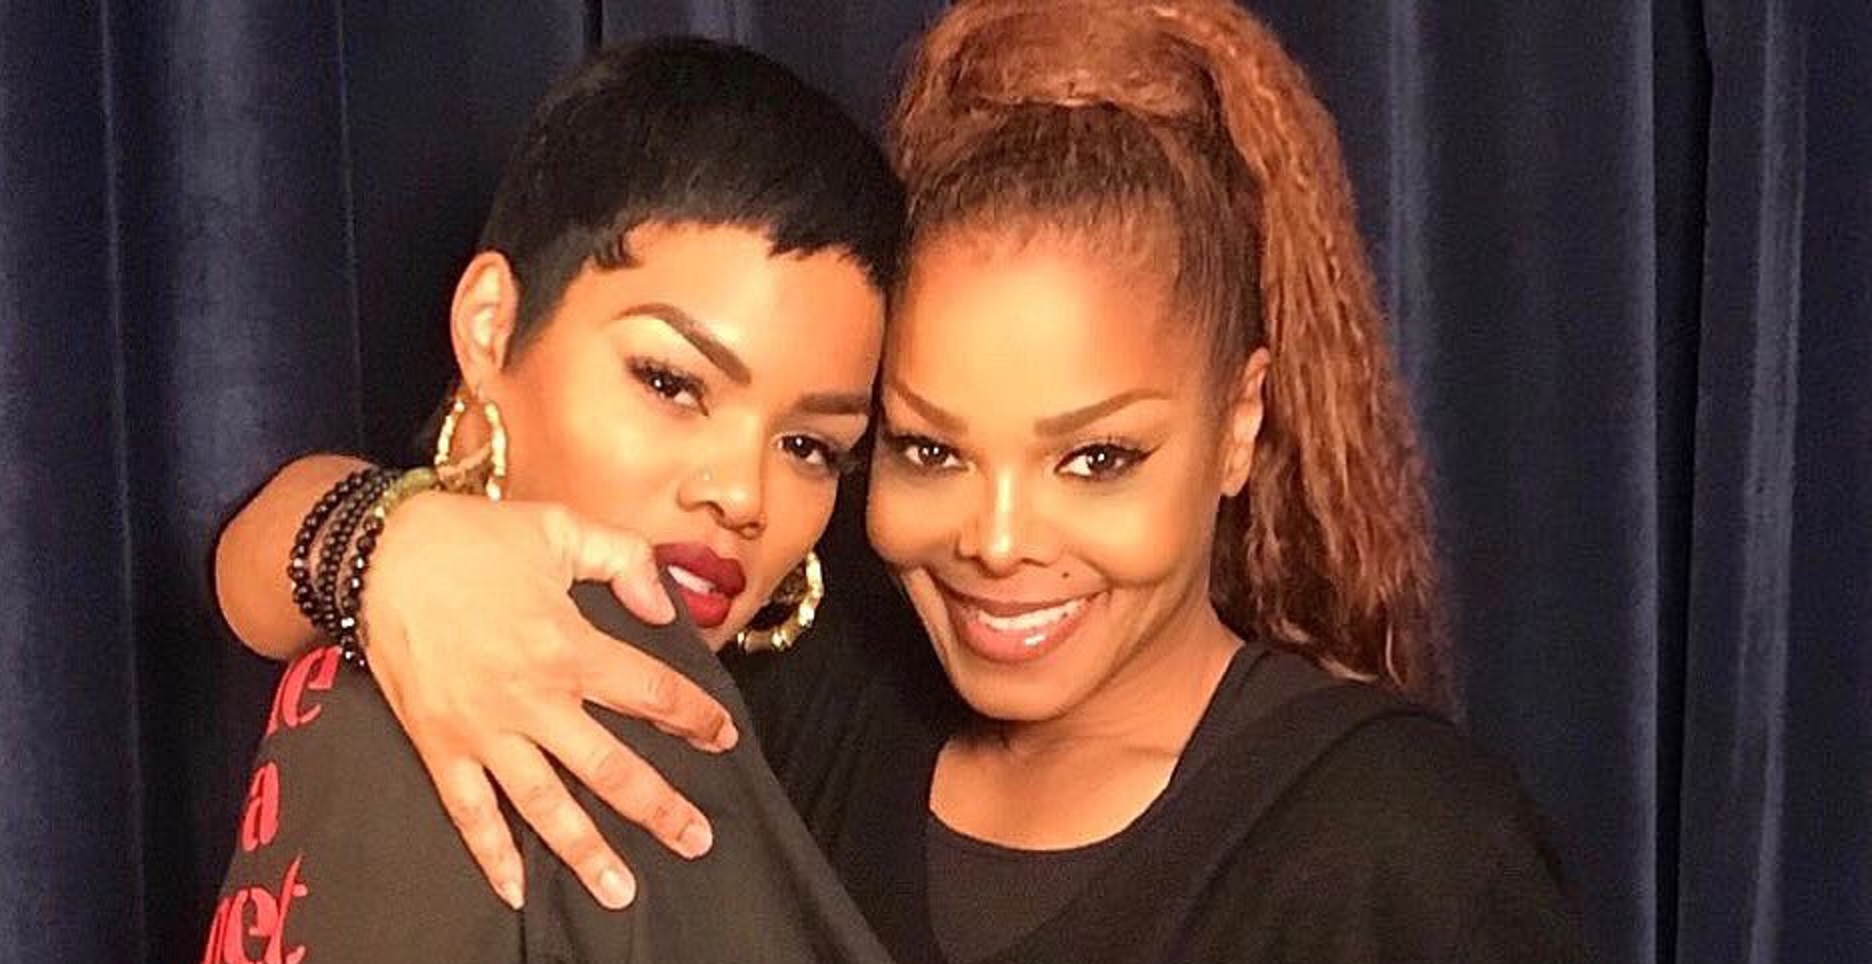 Janet Jackson Extends Support To Teyana Taylor ‘You have an undeniable gift’